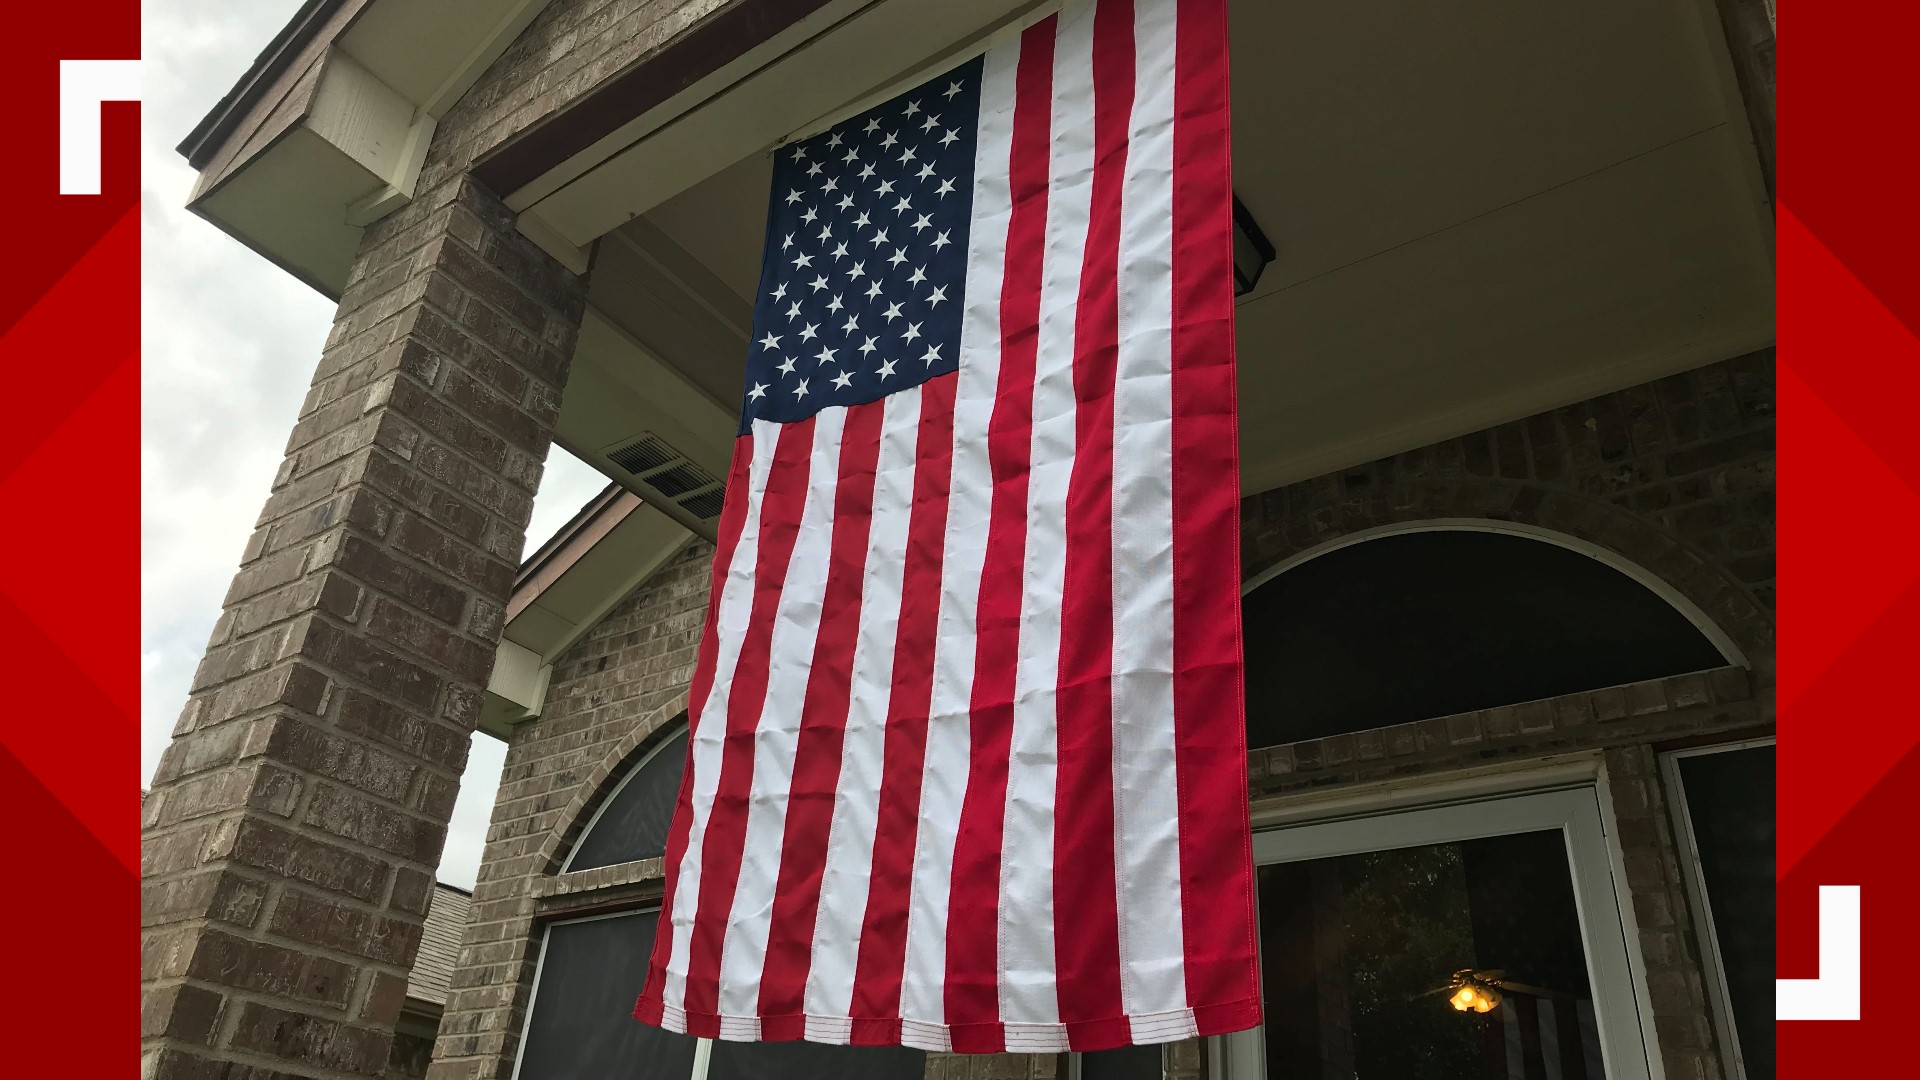 The active duty U.S. Army soldier who was repeatedly threatened with fines for flying his American flag at his residence will not be fined by the Associa Hill Country Homeowners Association of Round Rock.